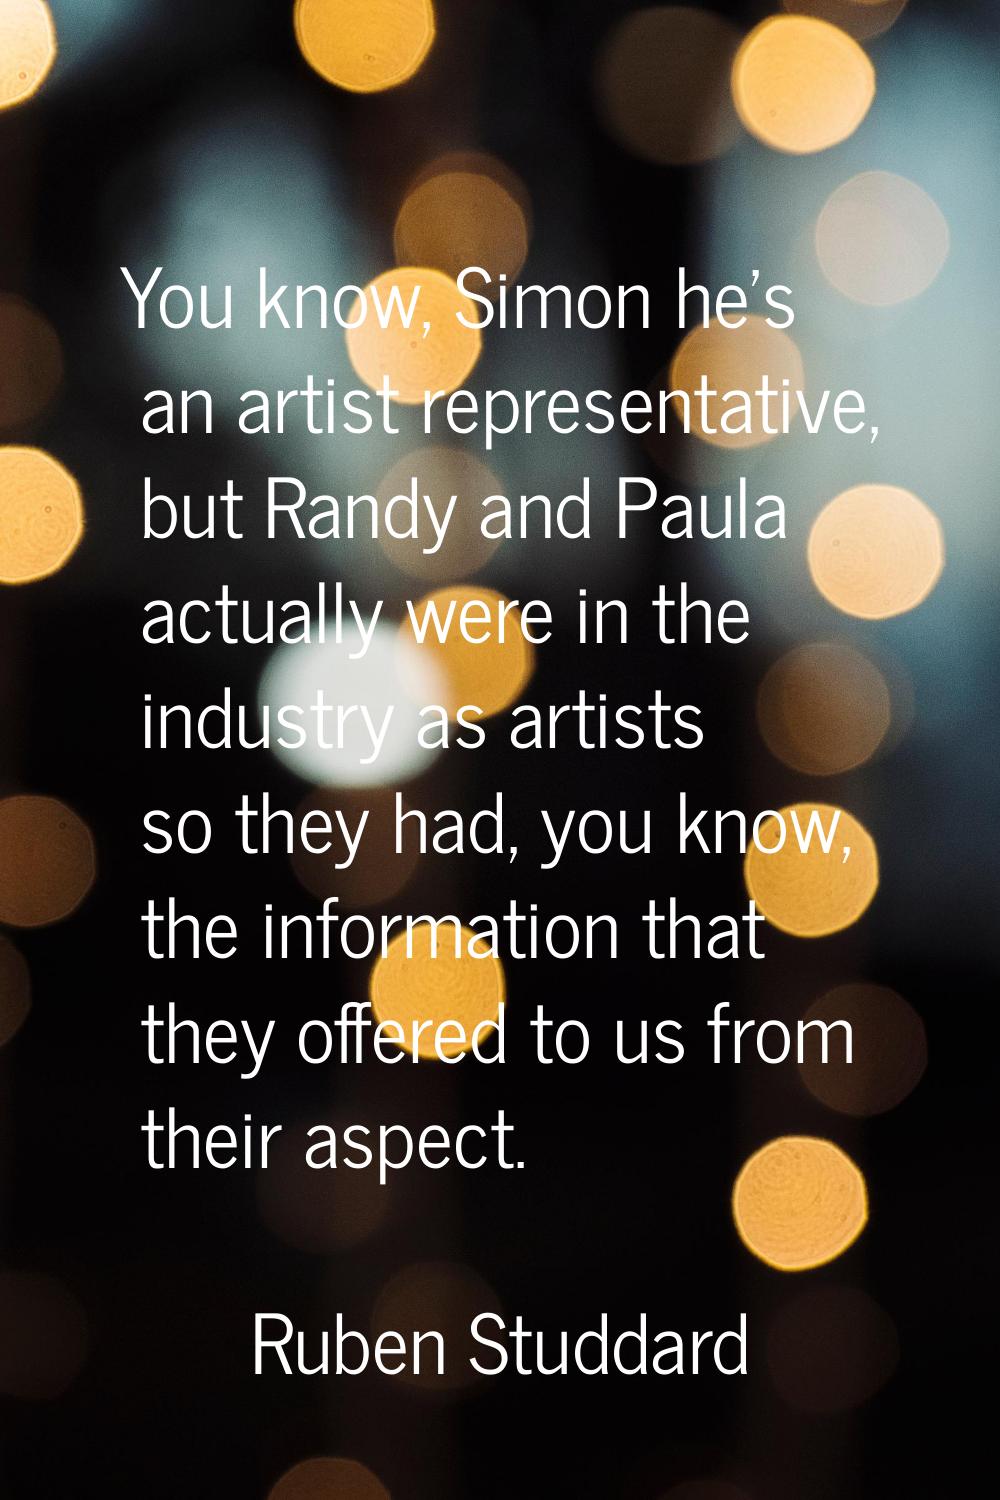 You know, Simon he's an artist representative, but Randy and Paula actually were in the industry as